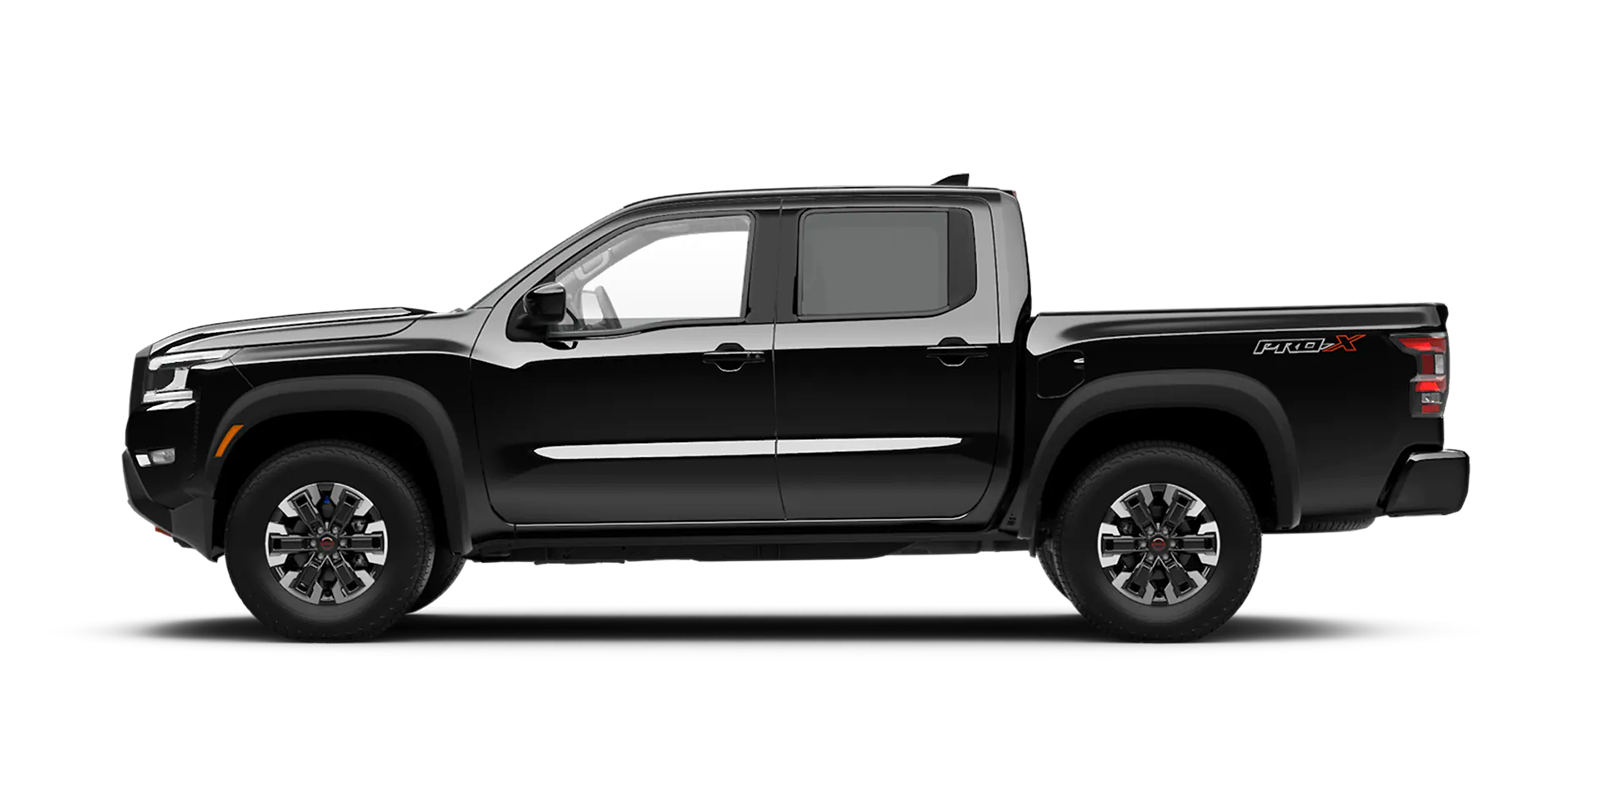 2022 Frontier Crew Cab Pro-X 4x2 in Super Black | Cherokee County Nissan in Holly Springs GA